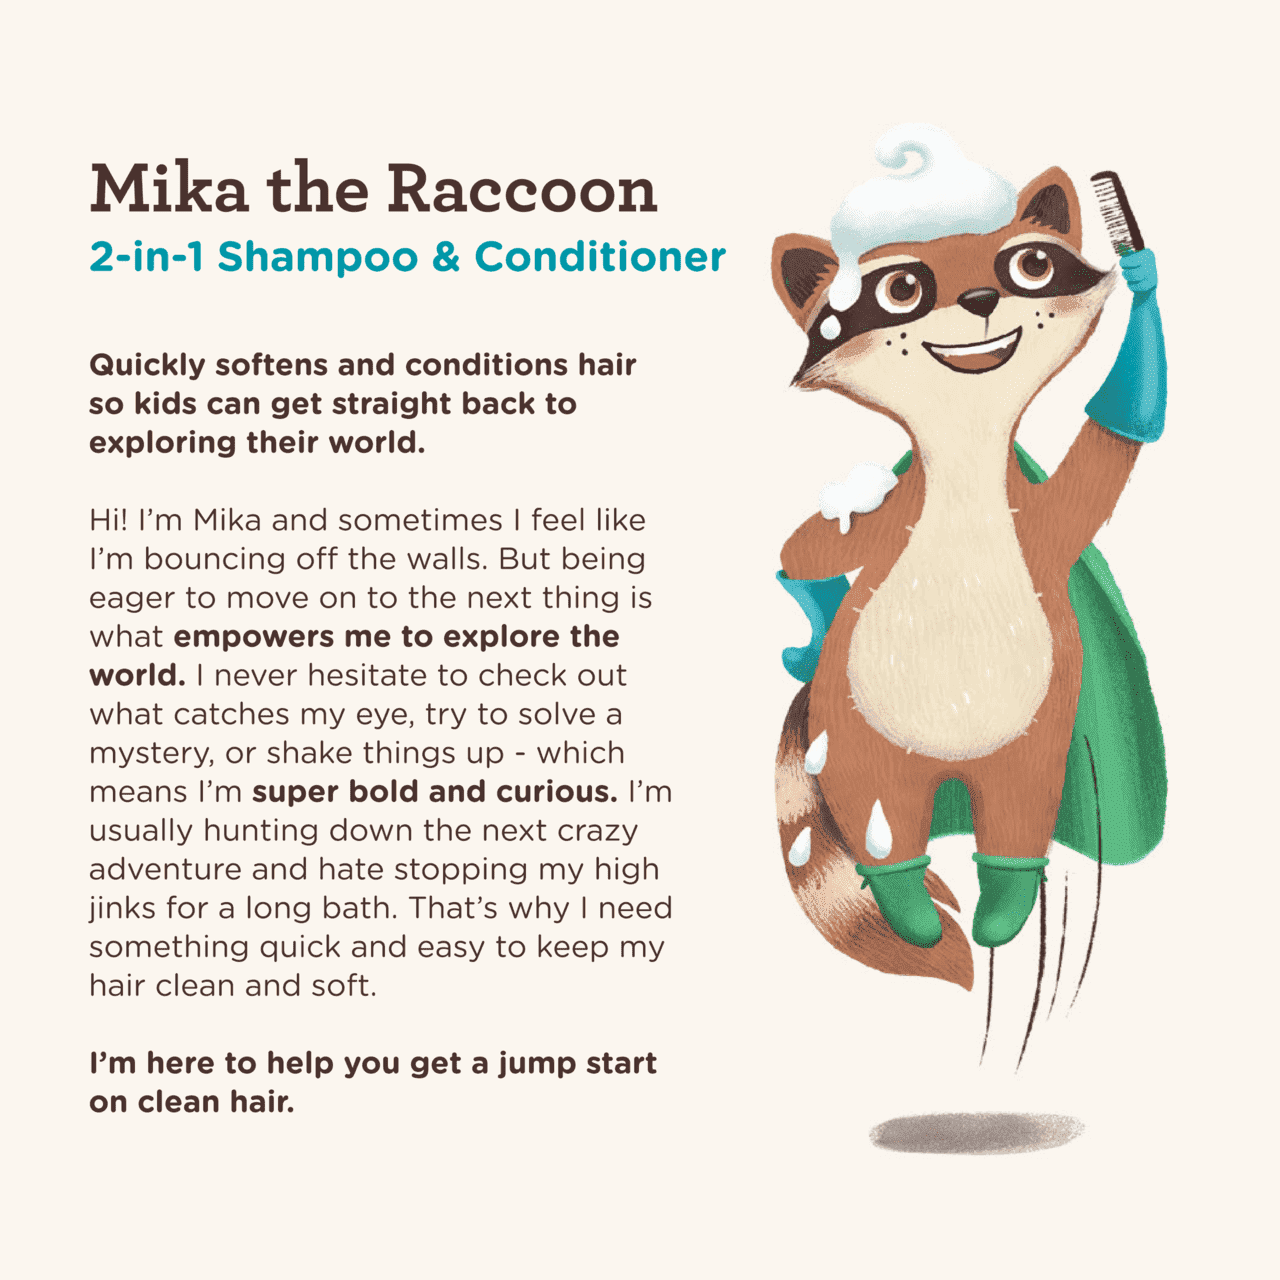 Mika the Raccoon, one of the AVEENO® Kids’ care crew with information on the 2-in-1 Shampoo & Conditioner